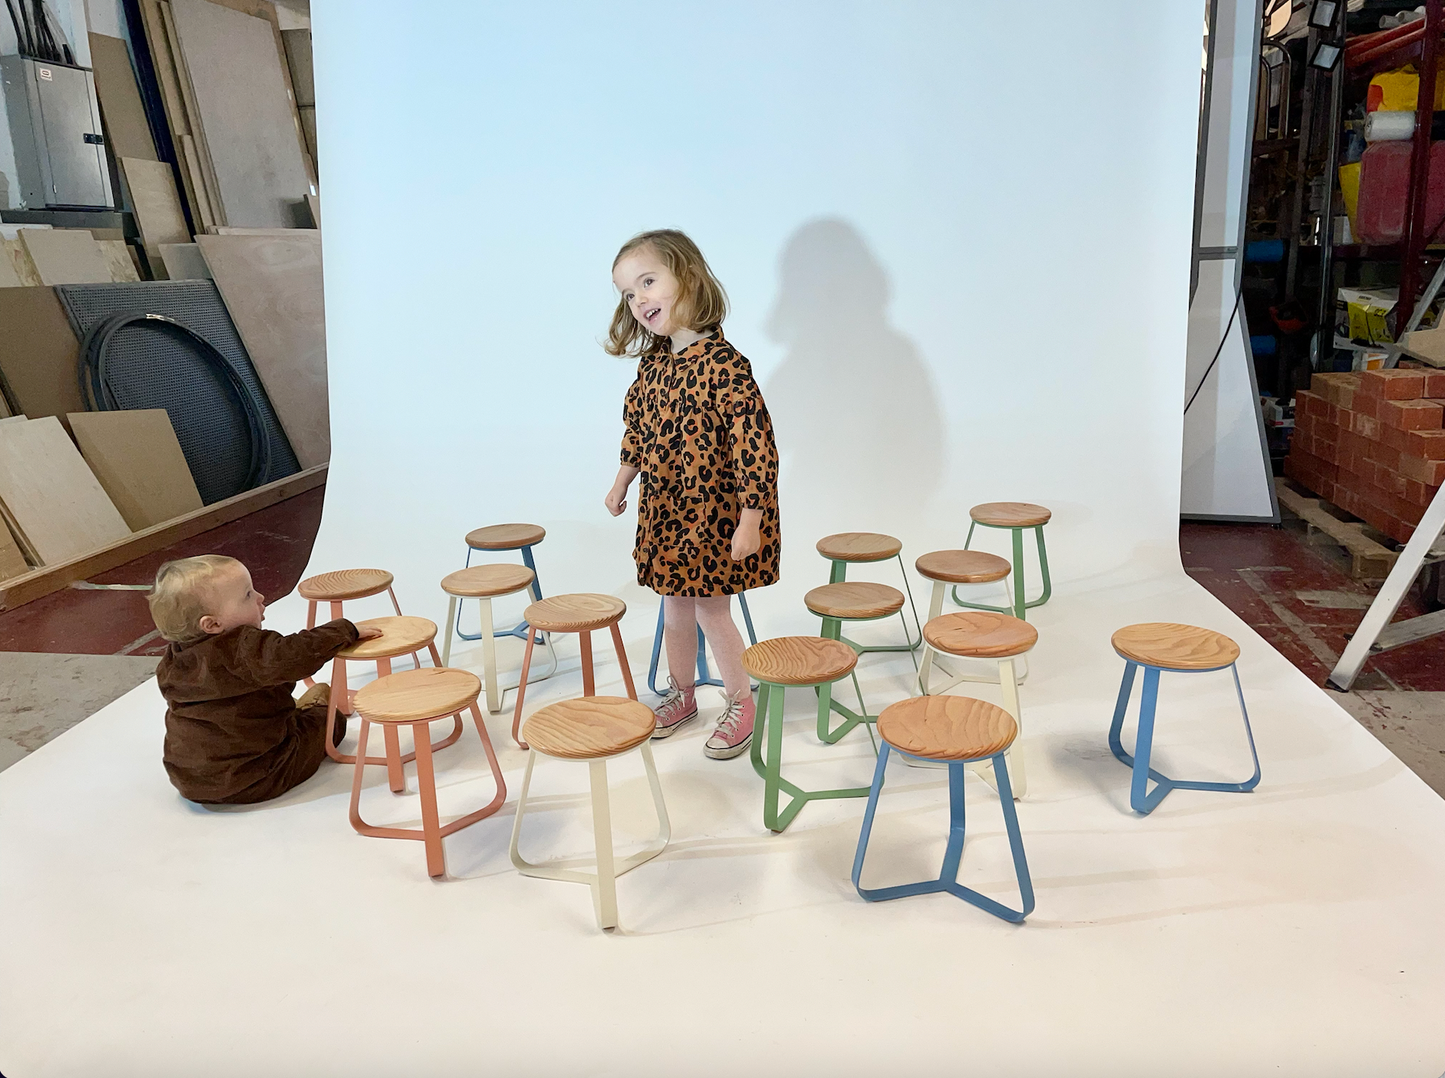 Own Brand Projects Children's Stool